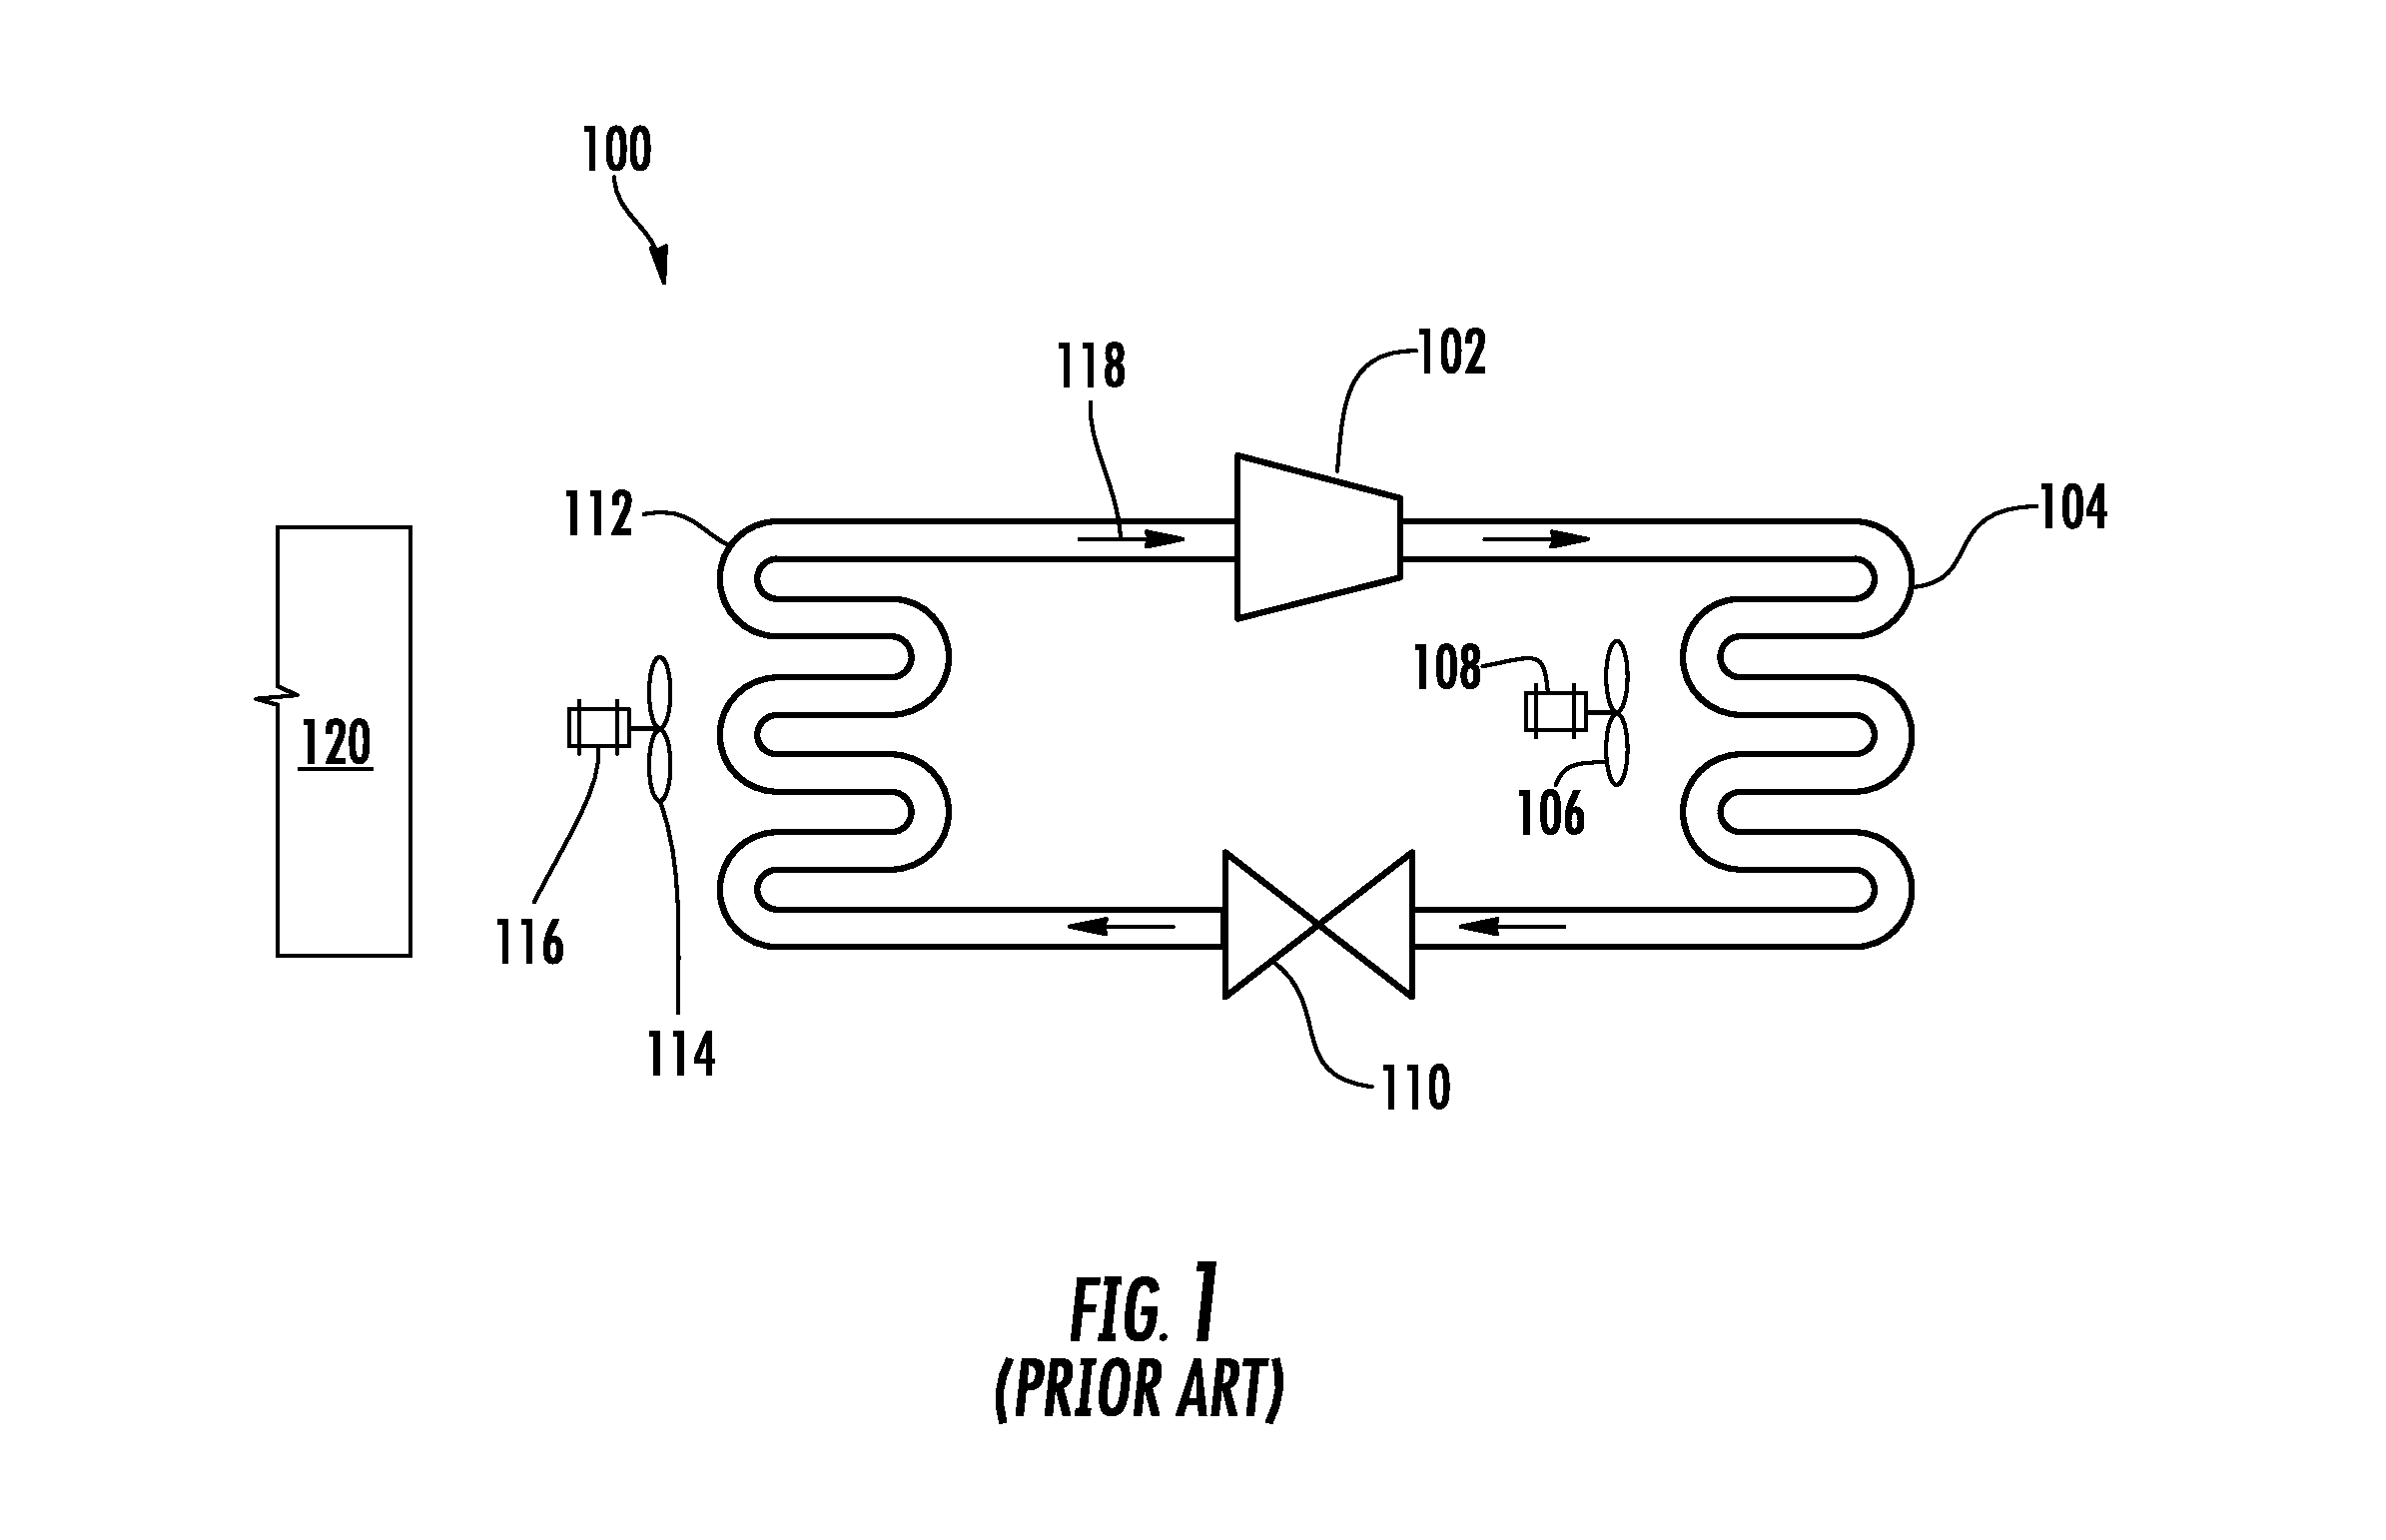 Method for Determining Proper Wiring of Multiple 3 Phase Motors in a Single System